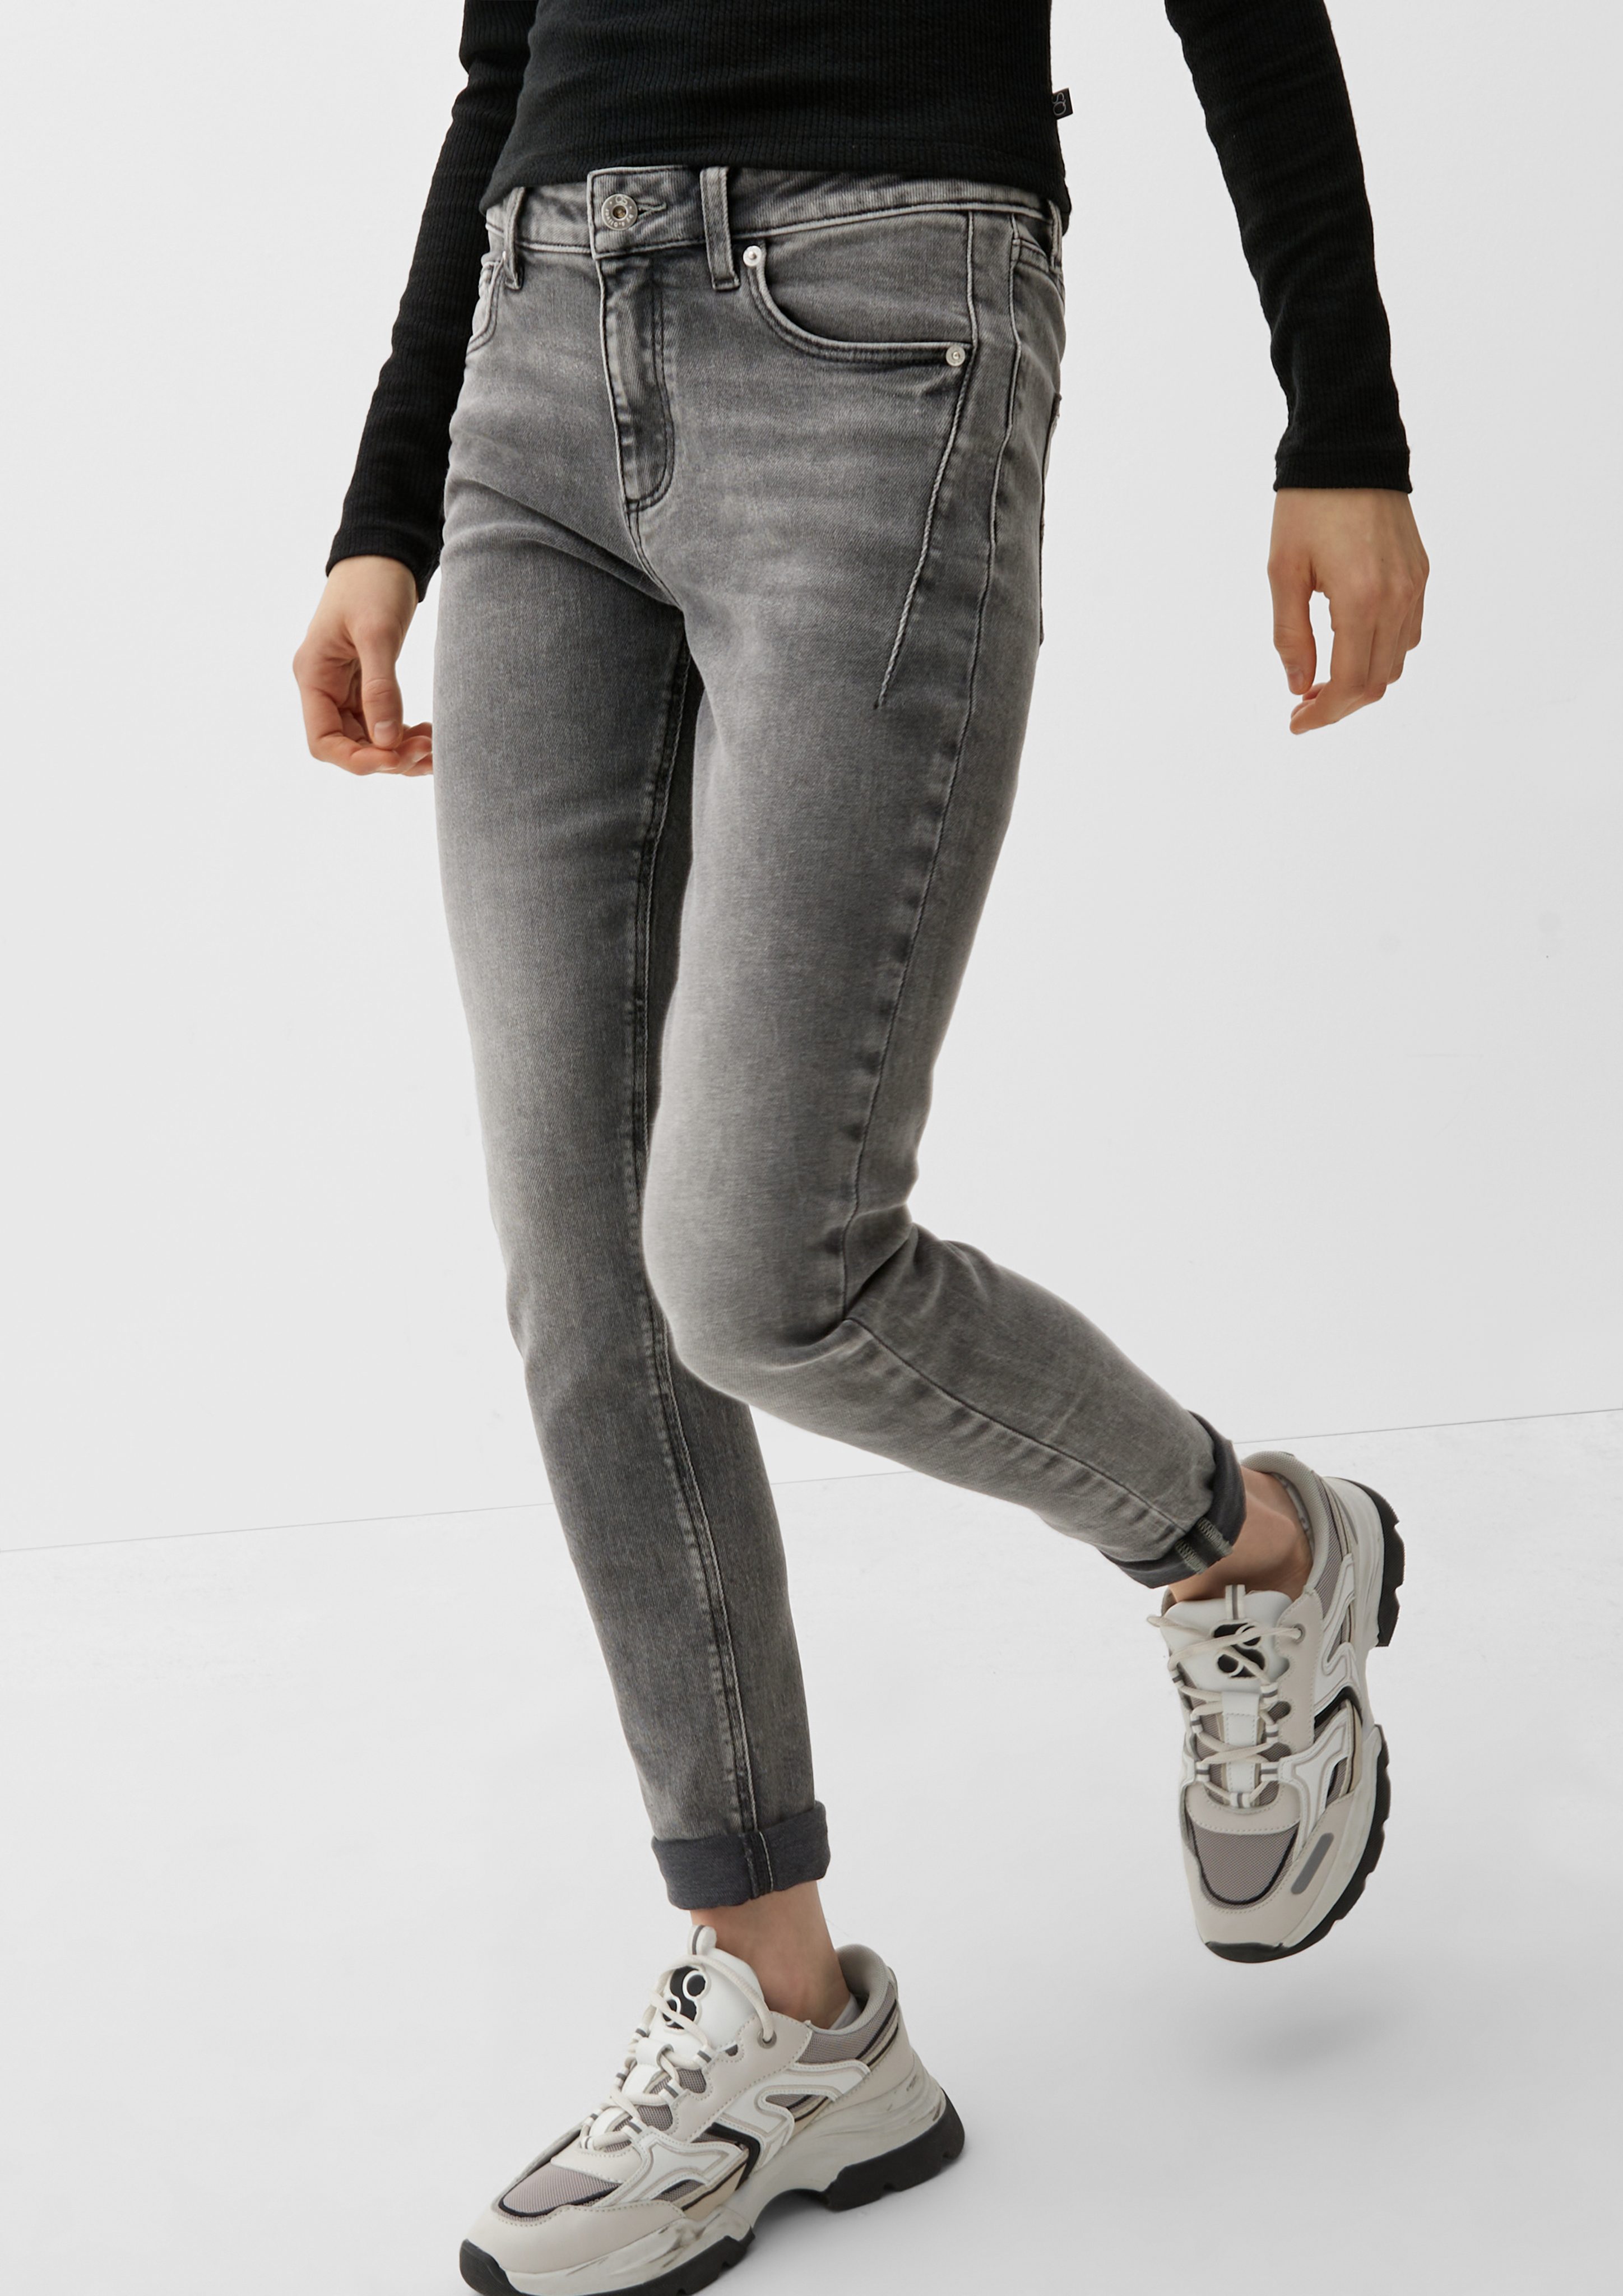 QS Stoffhose Jeans Skinny Leg Skinny / Sadie / Fit Mid / Rise Waschung